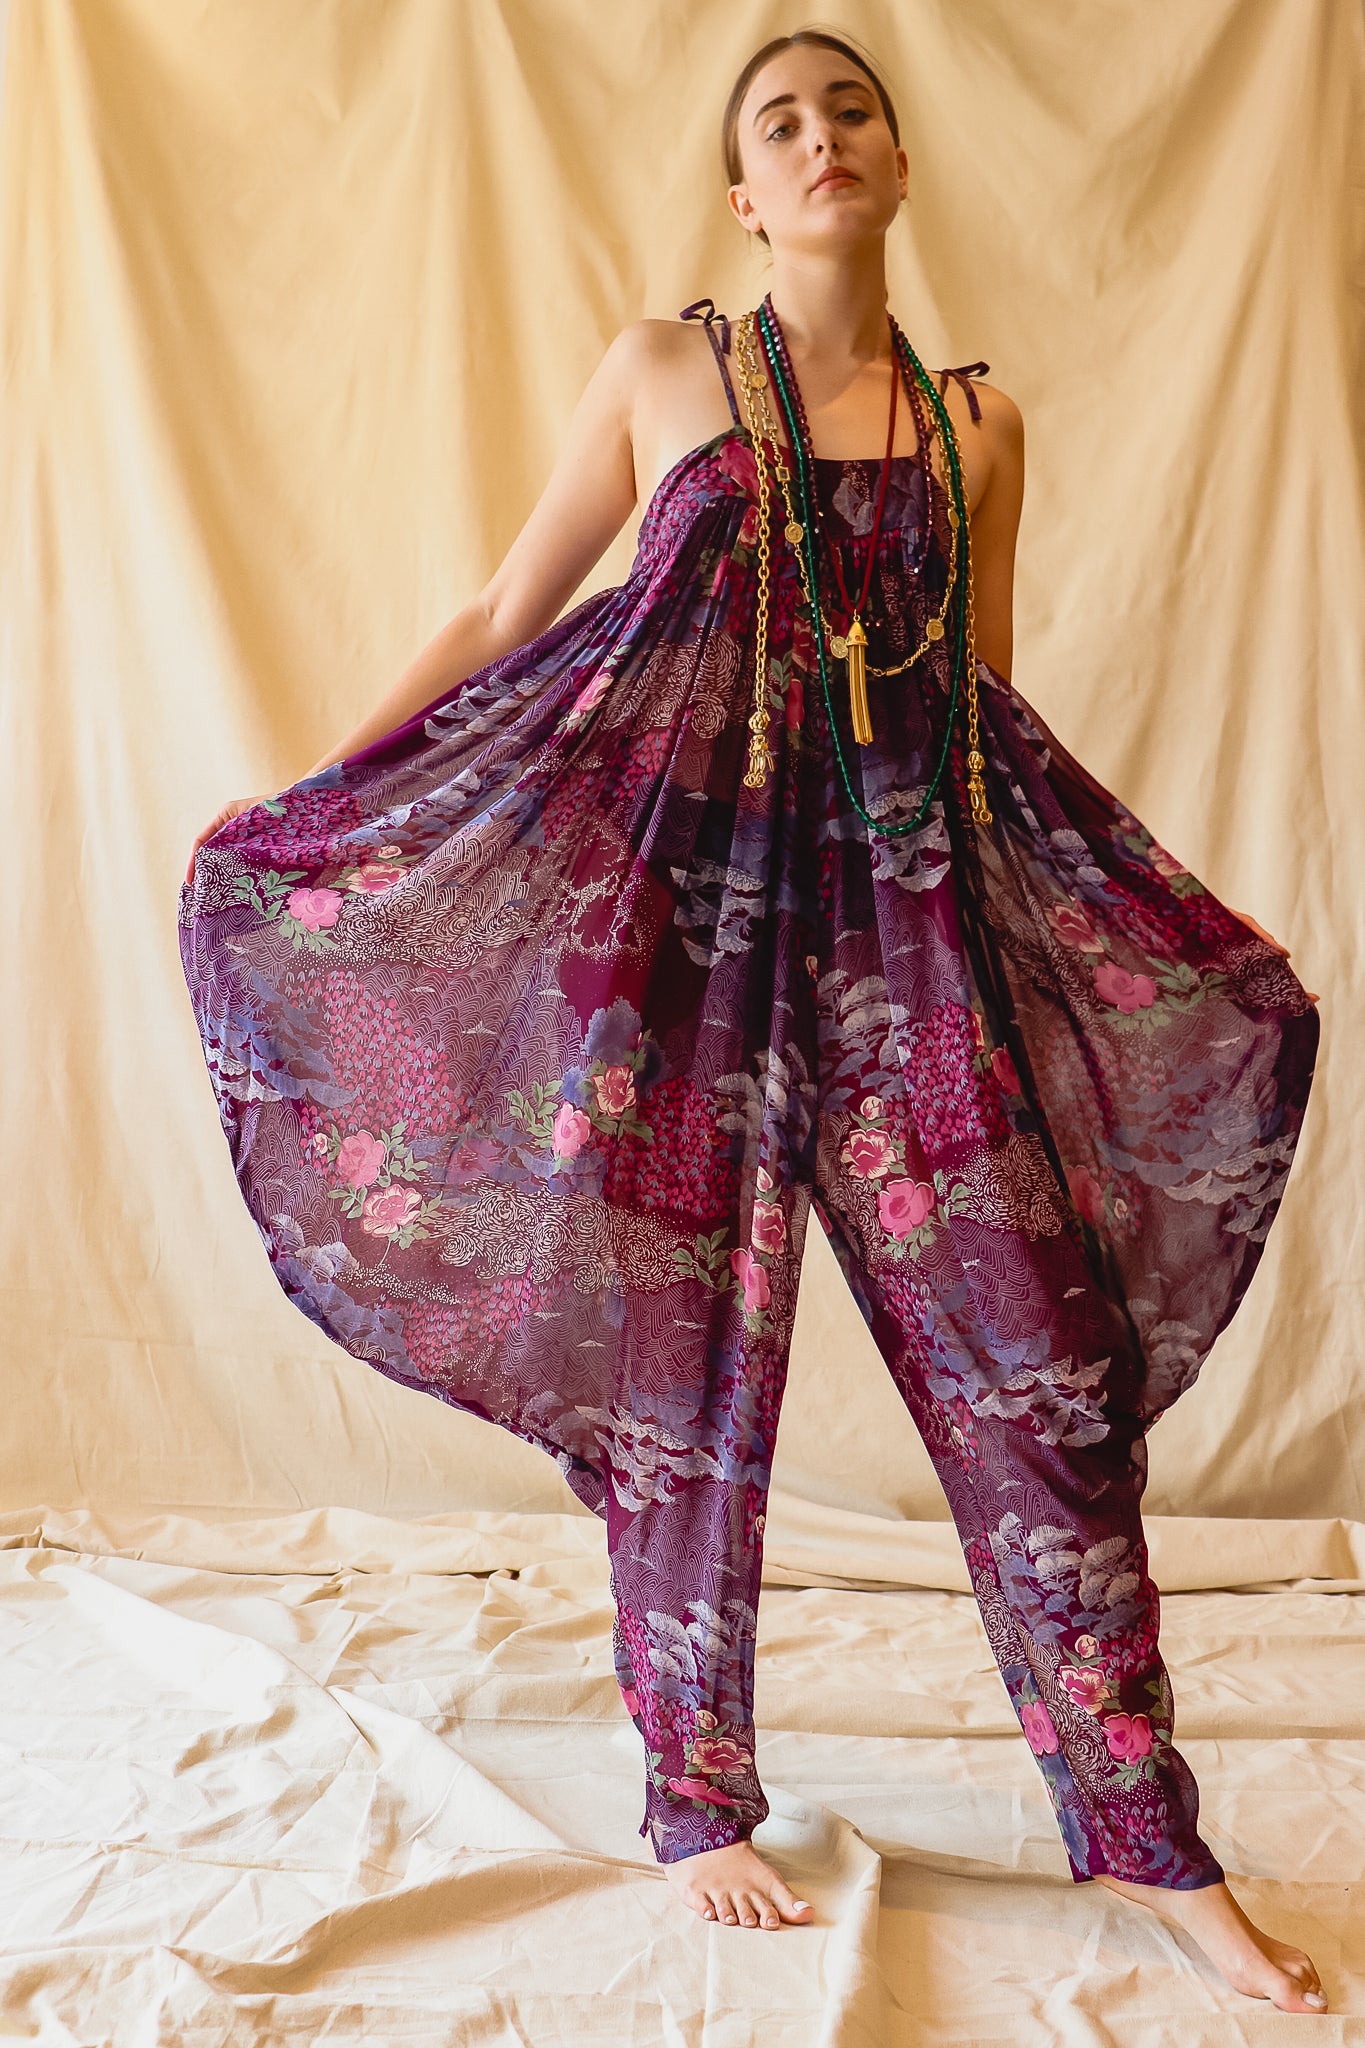 Recess Vintage Consignment LA Girl in Adini Sheer Purple Harem Jumpsuit and necklaces